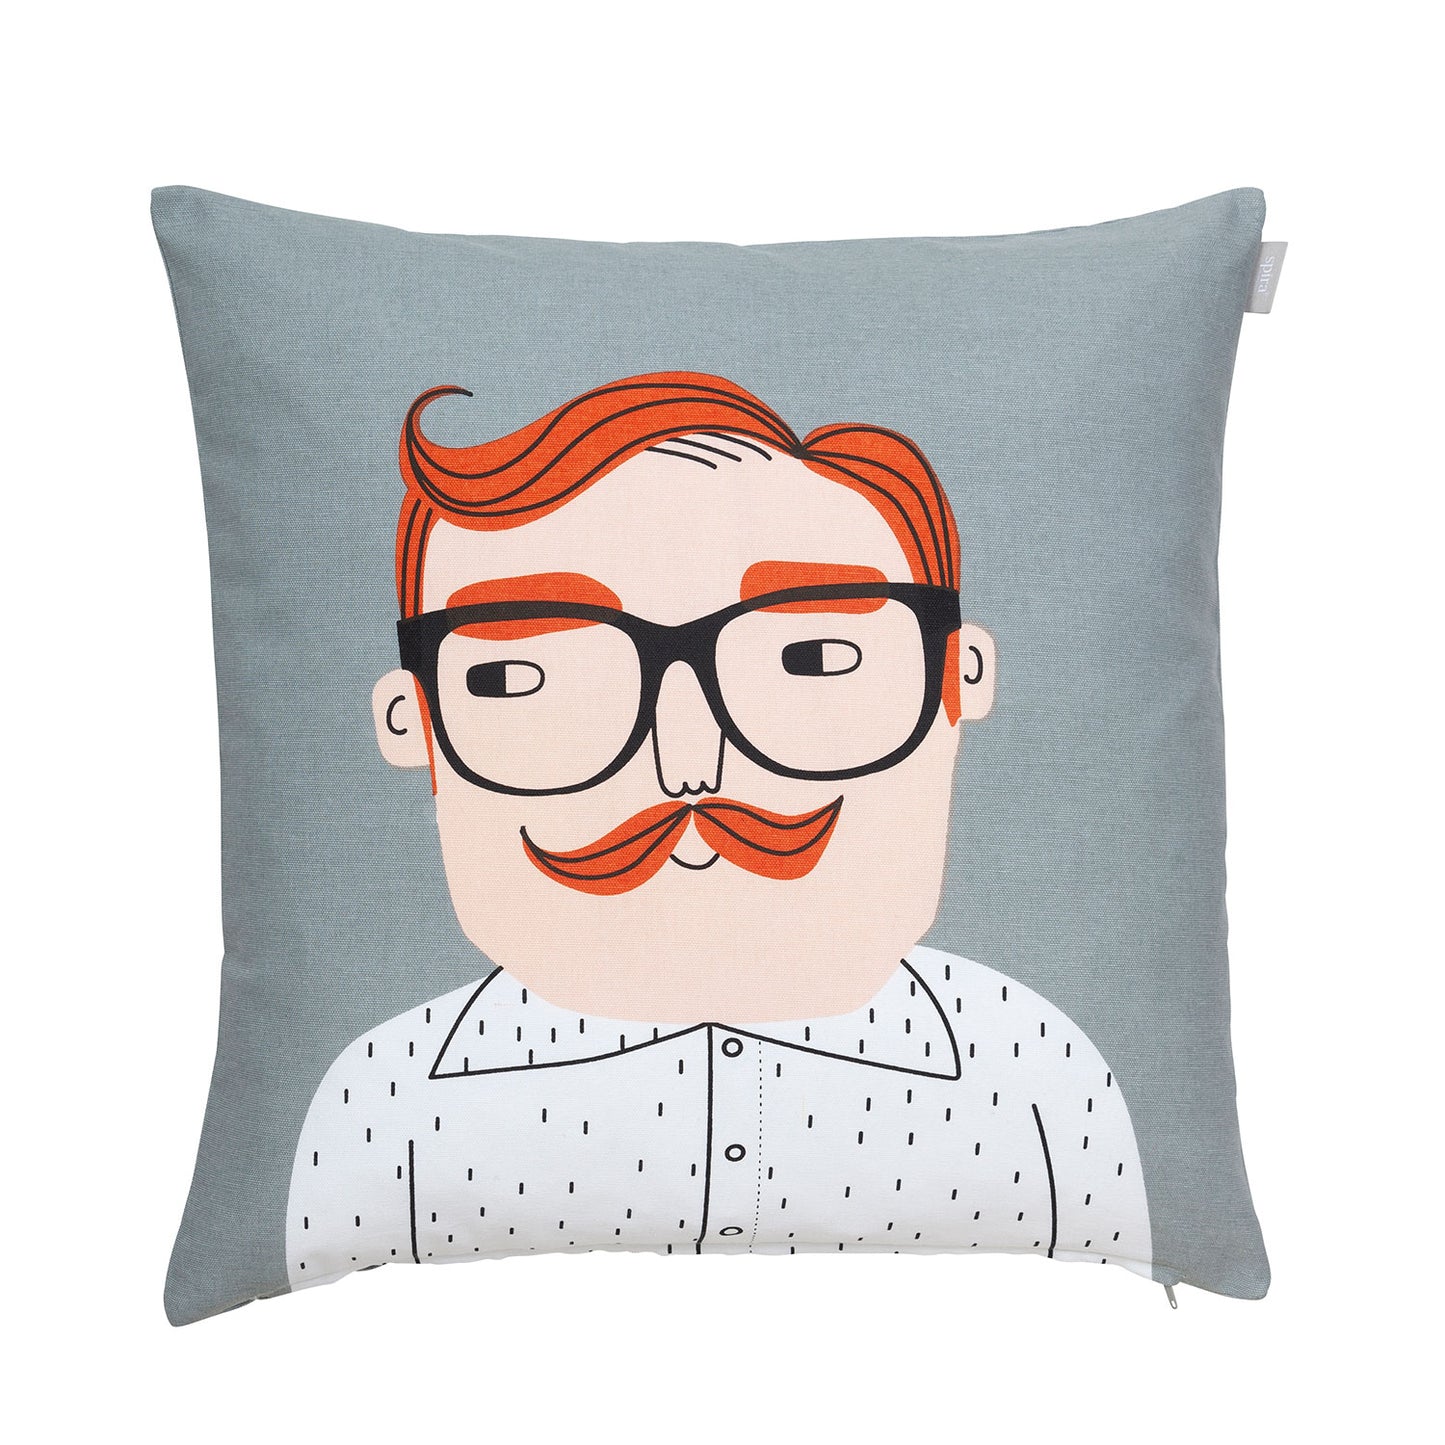 Gray cushion cover with man's face with red hair and mustache along with black eyeglasses and white button down shirt.